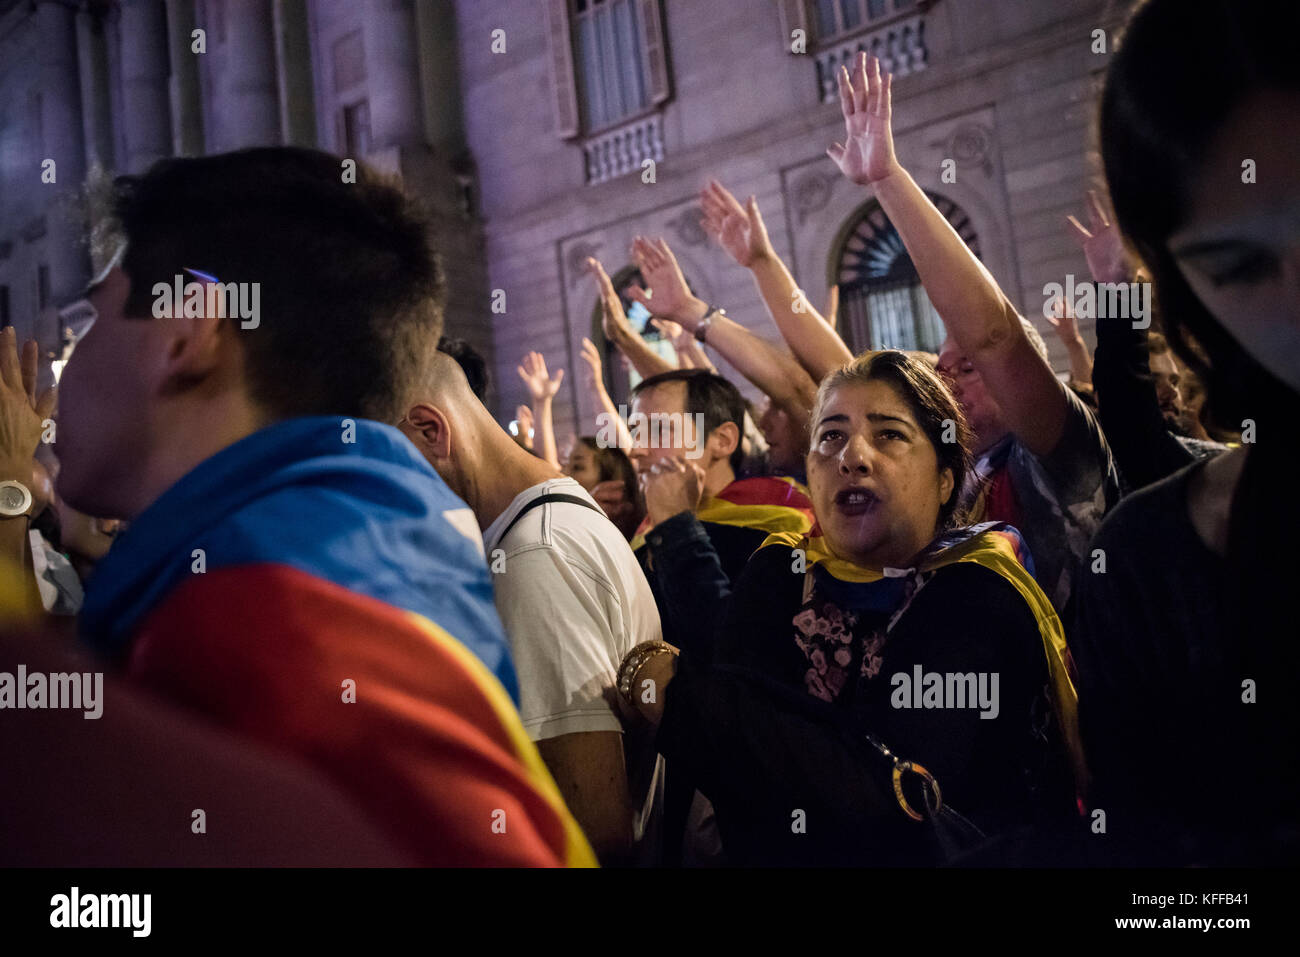 Barcelona, Spain. 27th Oct, 2017. Thousands of people celebrate the proclamation of the Republic of Catalonia in the Sant Jaume Square, also asking for the freedom of Jordi Sánchez and Jordi Cuixart. The Catalan Parliament has proclaimed, after a vote, the formation of Catalonia as a new state on the afternoon of 27 October, opposite the headquarters of the Catalan government. A few hours later the Government of Spain announced the intervention of Catalonia with the cessation of all the government and intervention of the regional police. Credit: Carles Desfilis / Alamy Live News Stock Photo